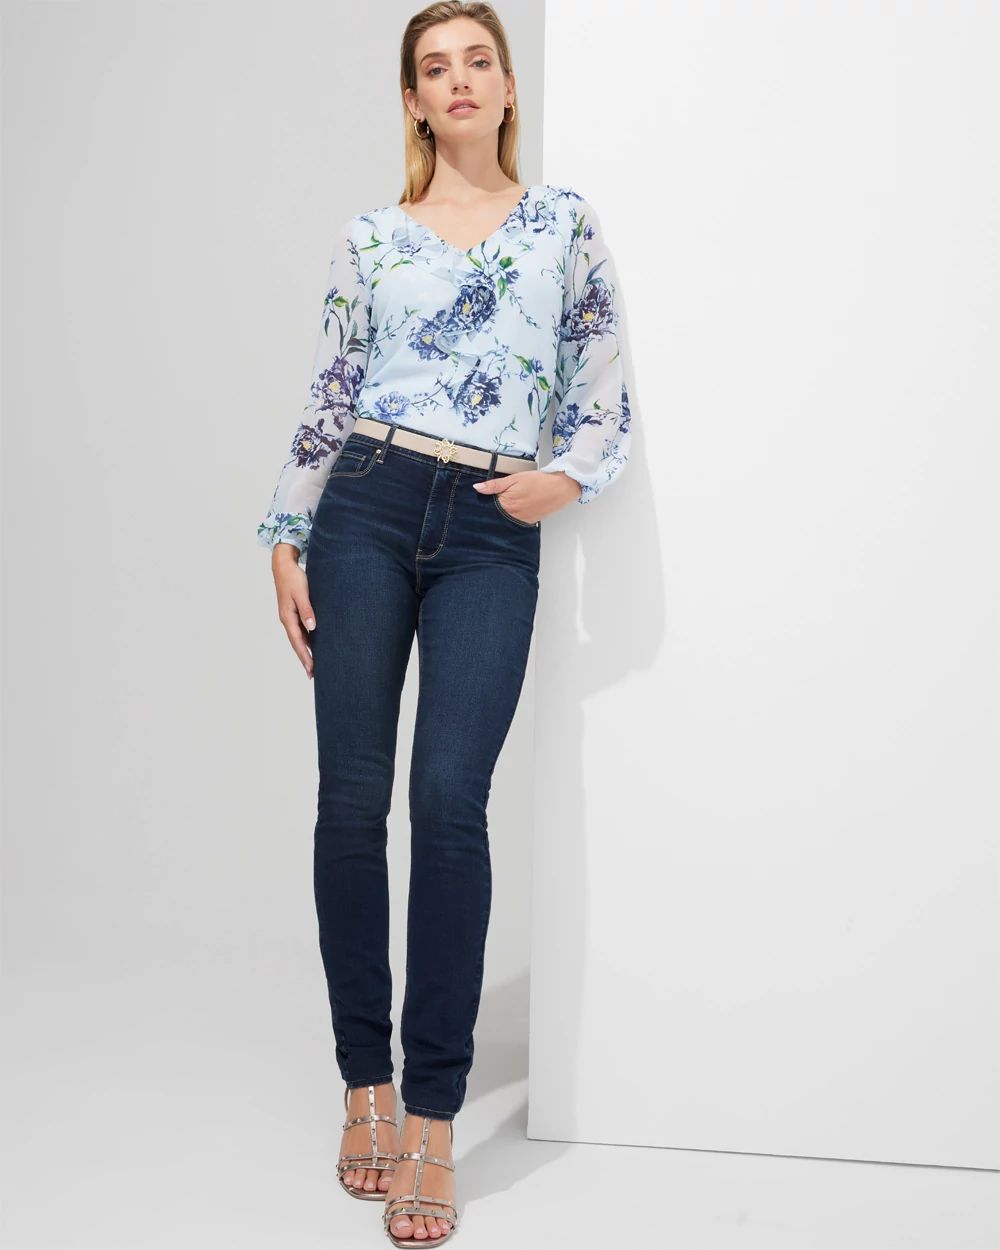 Outlet WHBM Long Sleeve Ruffle Blouse click to view larger image.